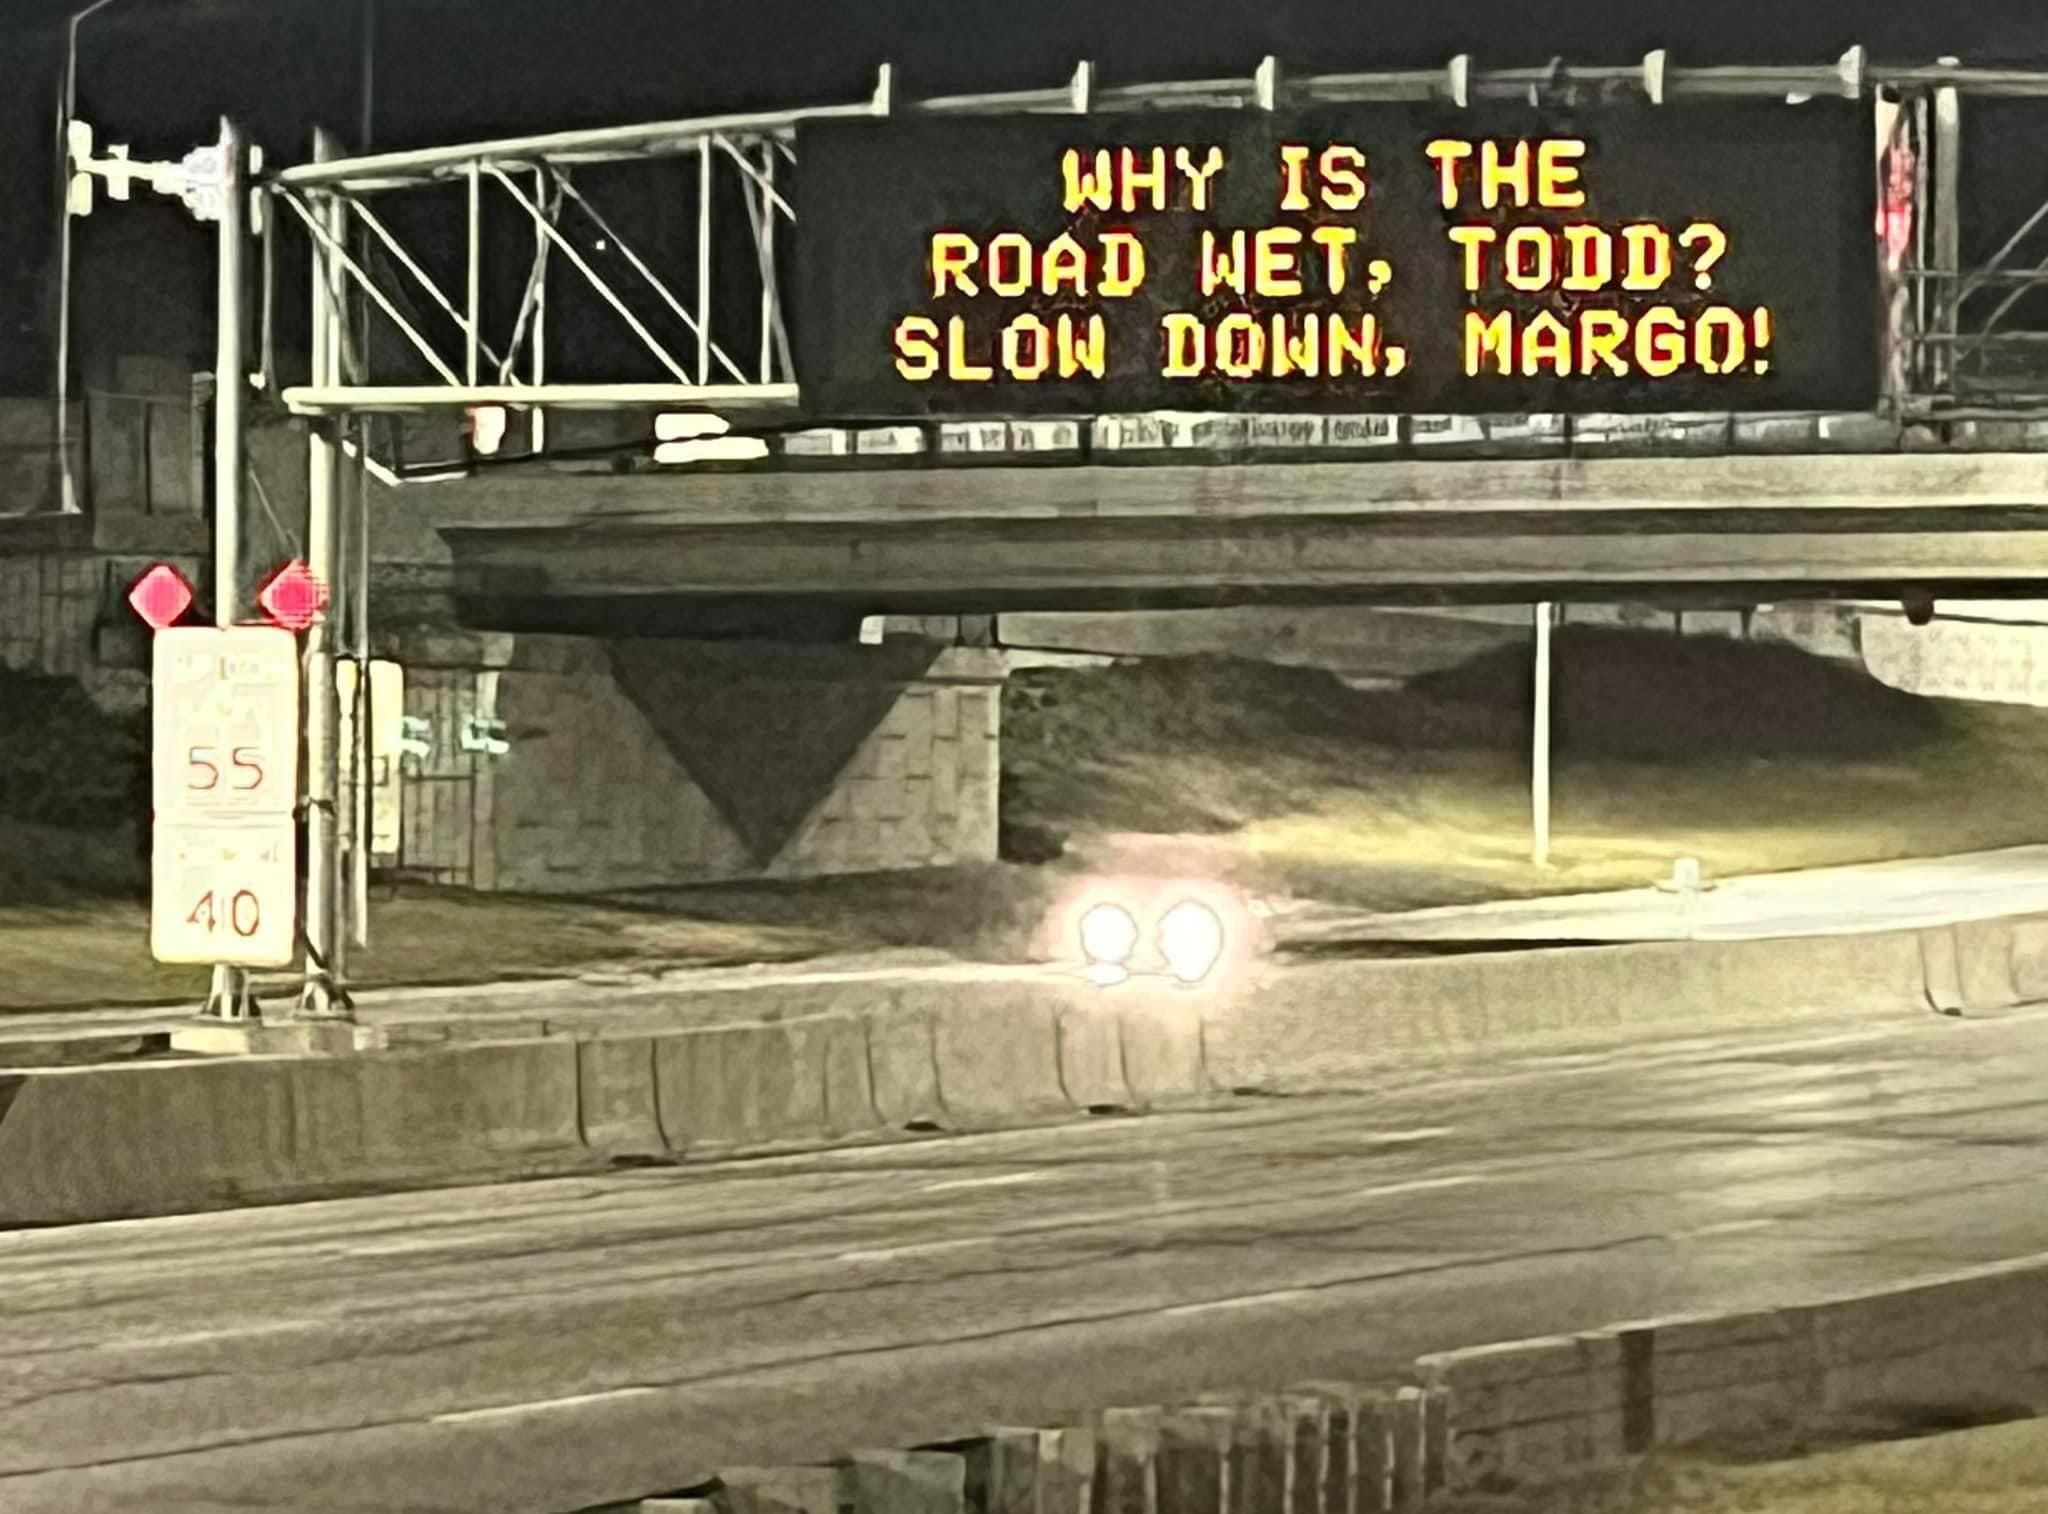 Every digital road sign from the Department of Transportation in Iowa this week: